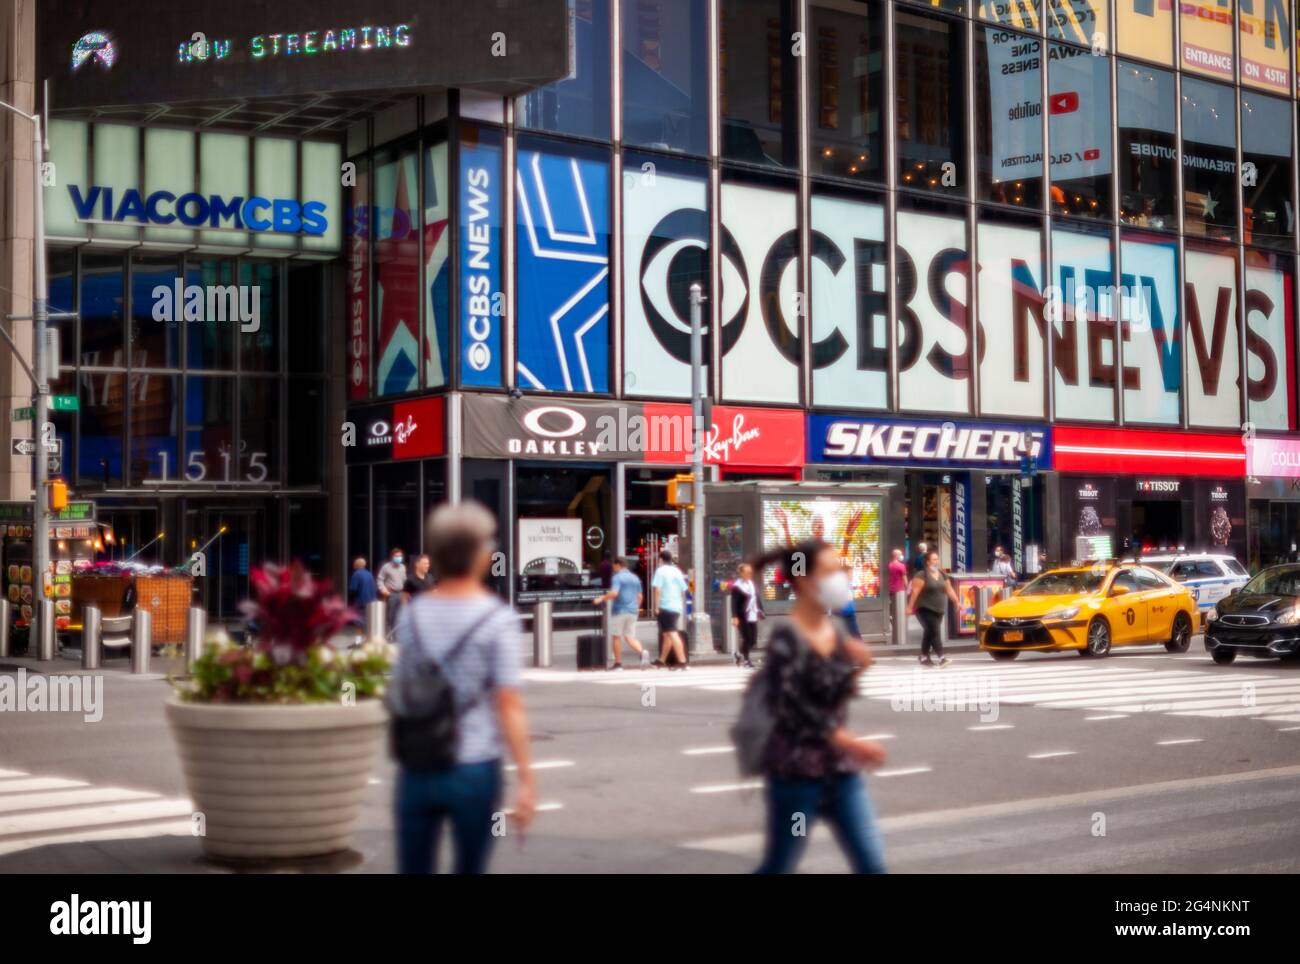 The ViacomCBS headquarters in Times Square in New York on Friday, June 11, 2021. (© Richard B. Levine) Stock Photo